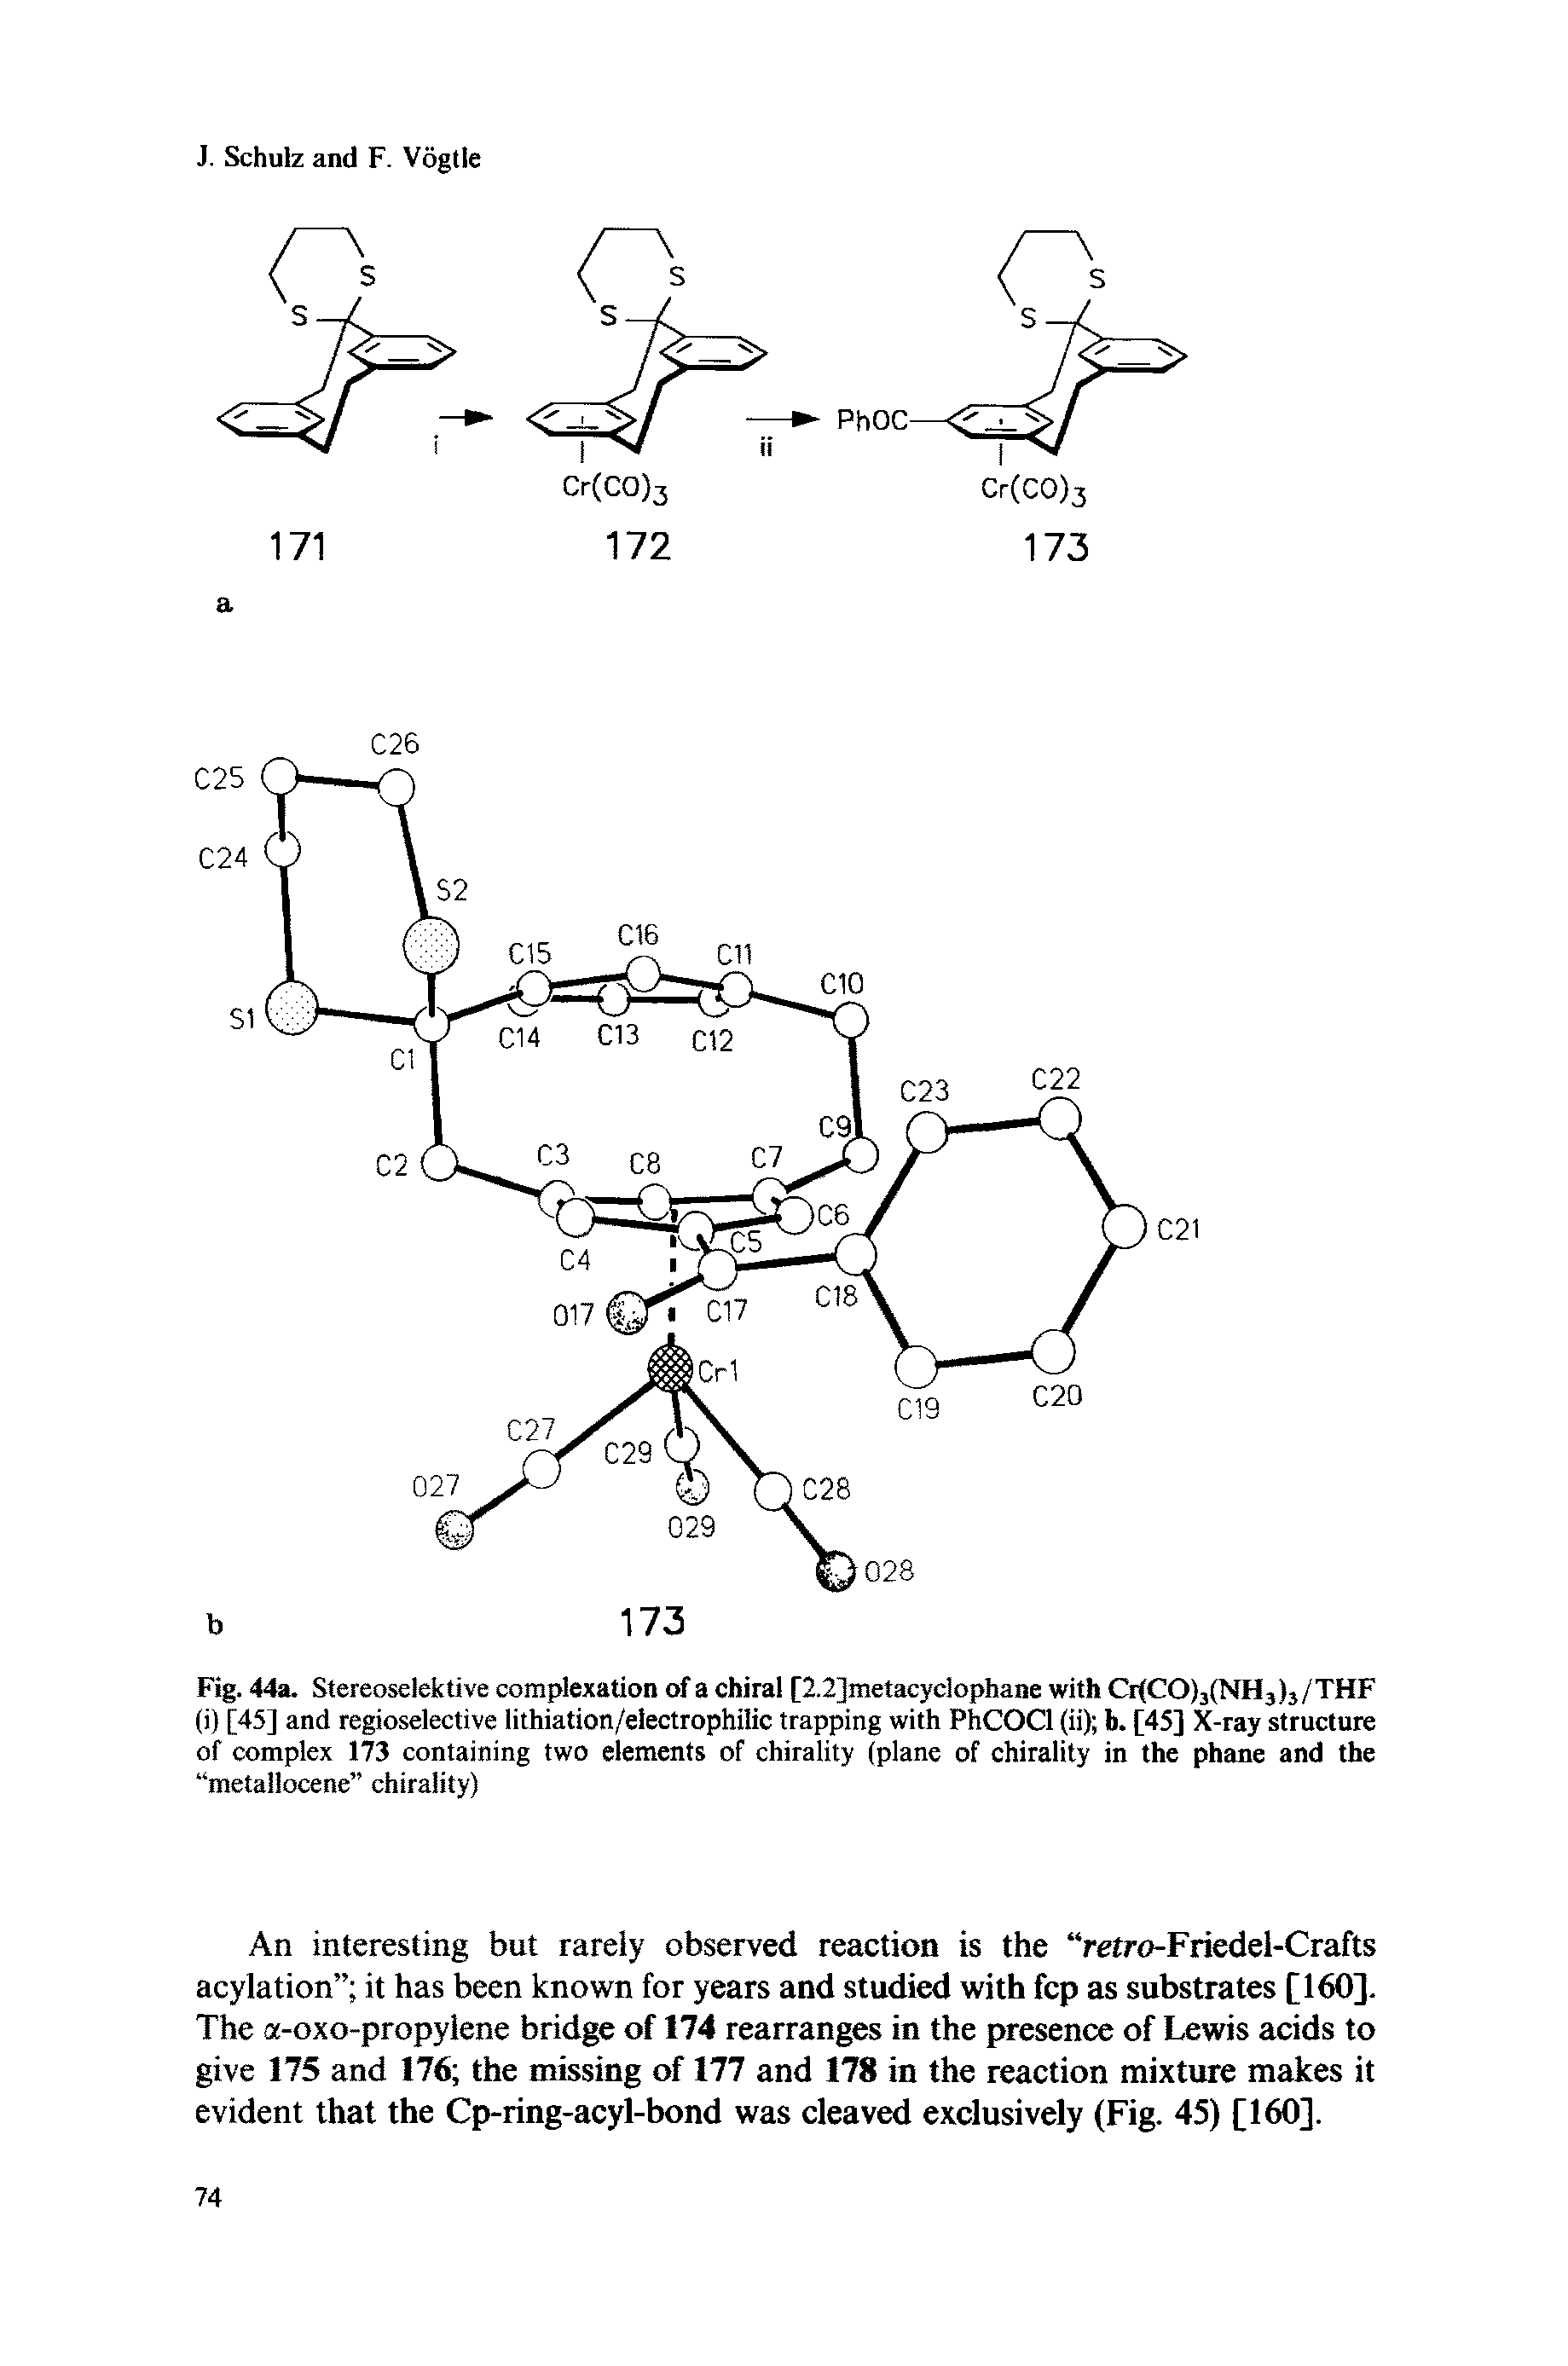 Fig. 44a. Stereoselektive complexation of a chiral [2.2]metacyclophane with CifCO)3(NH3)3/THF (i) [45] and regioselective lithiation/electrophilic trapping with PhCOCl (ii) b. [45] X-ray structure of complex 173 containing two elements of chirality (plane of chirality in the phane and the...